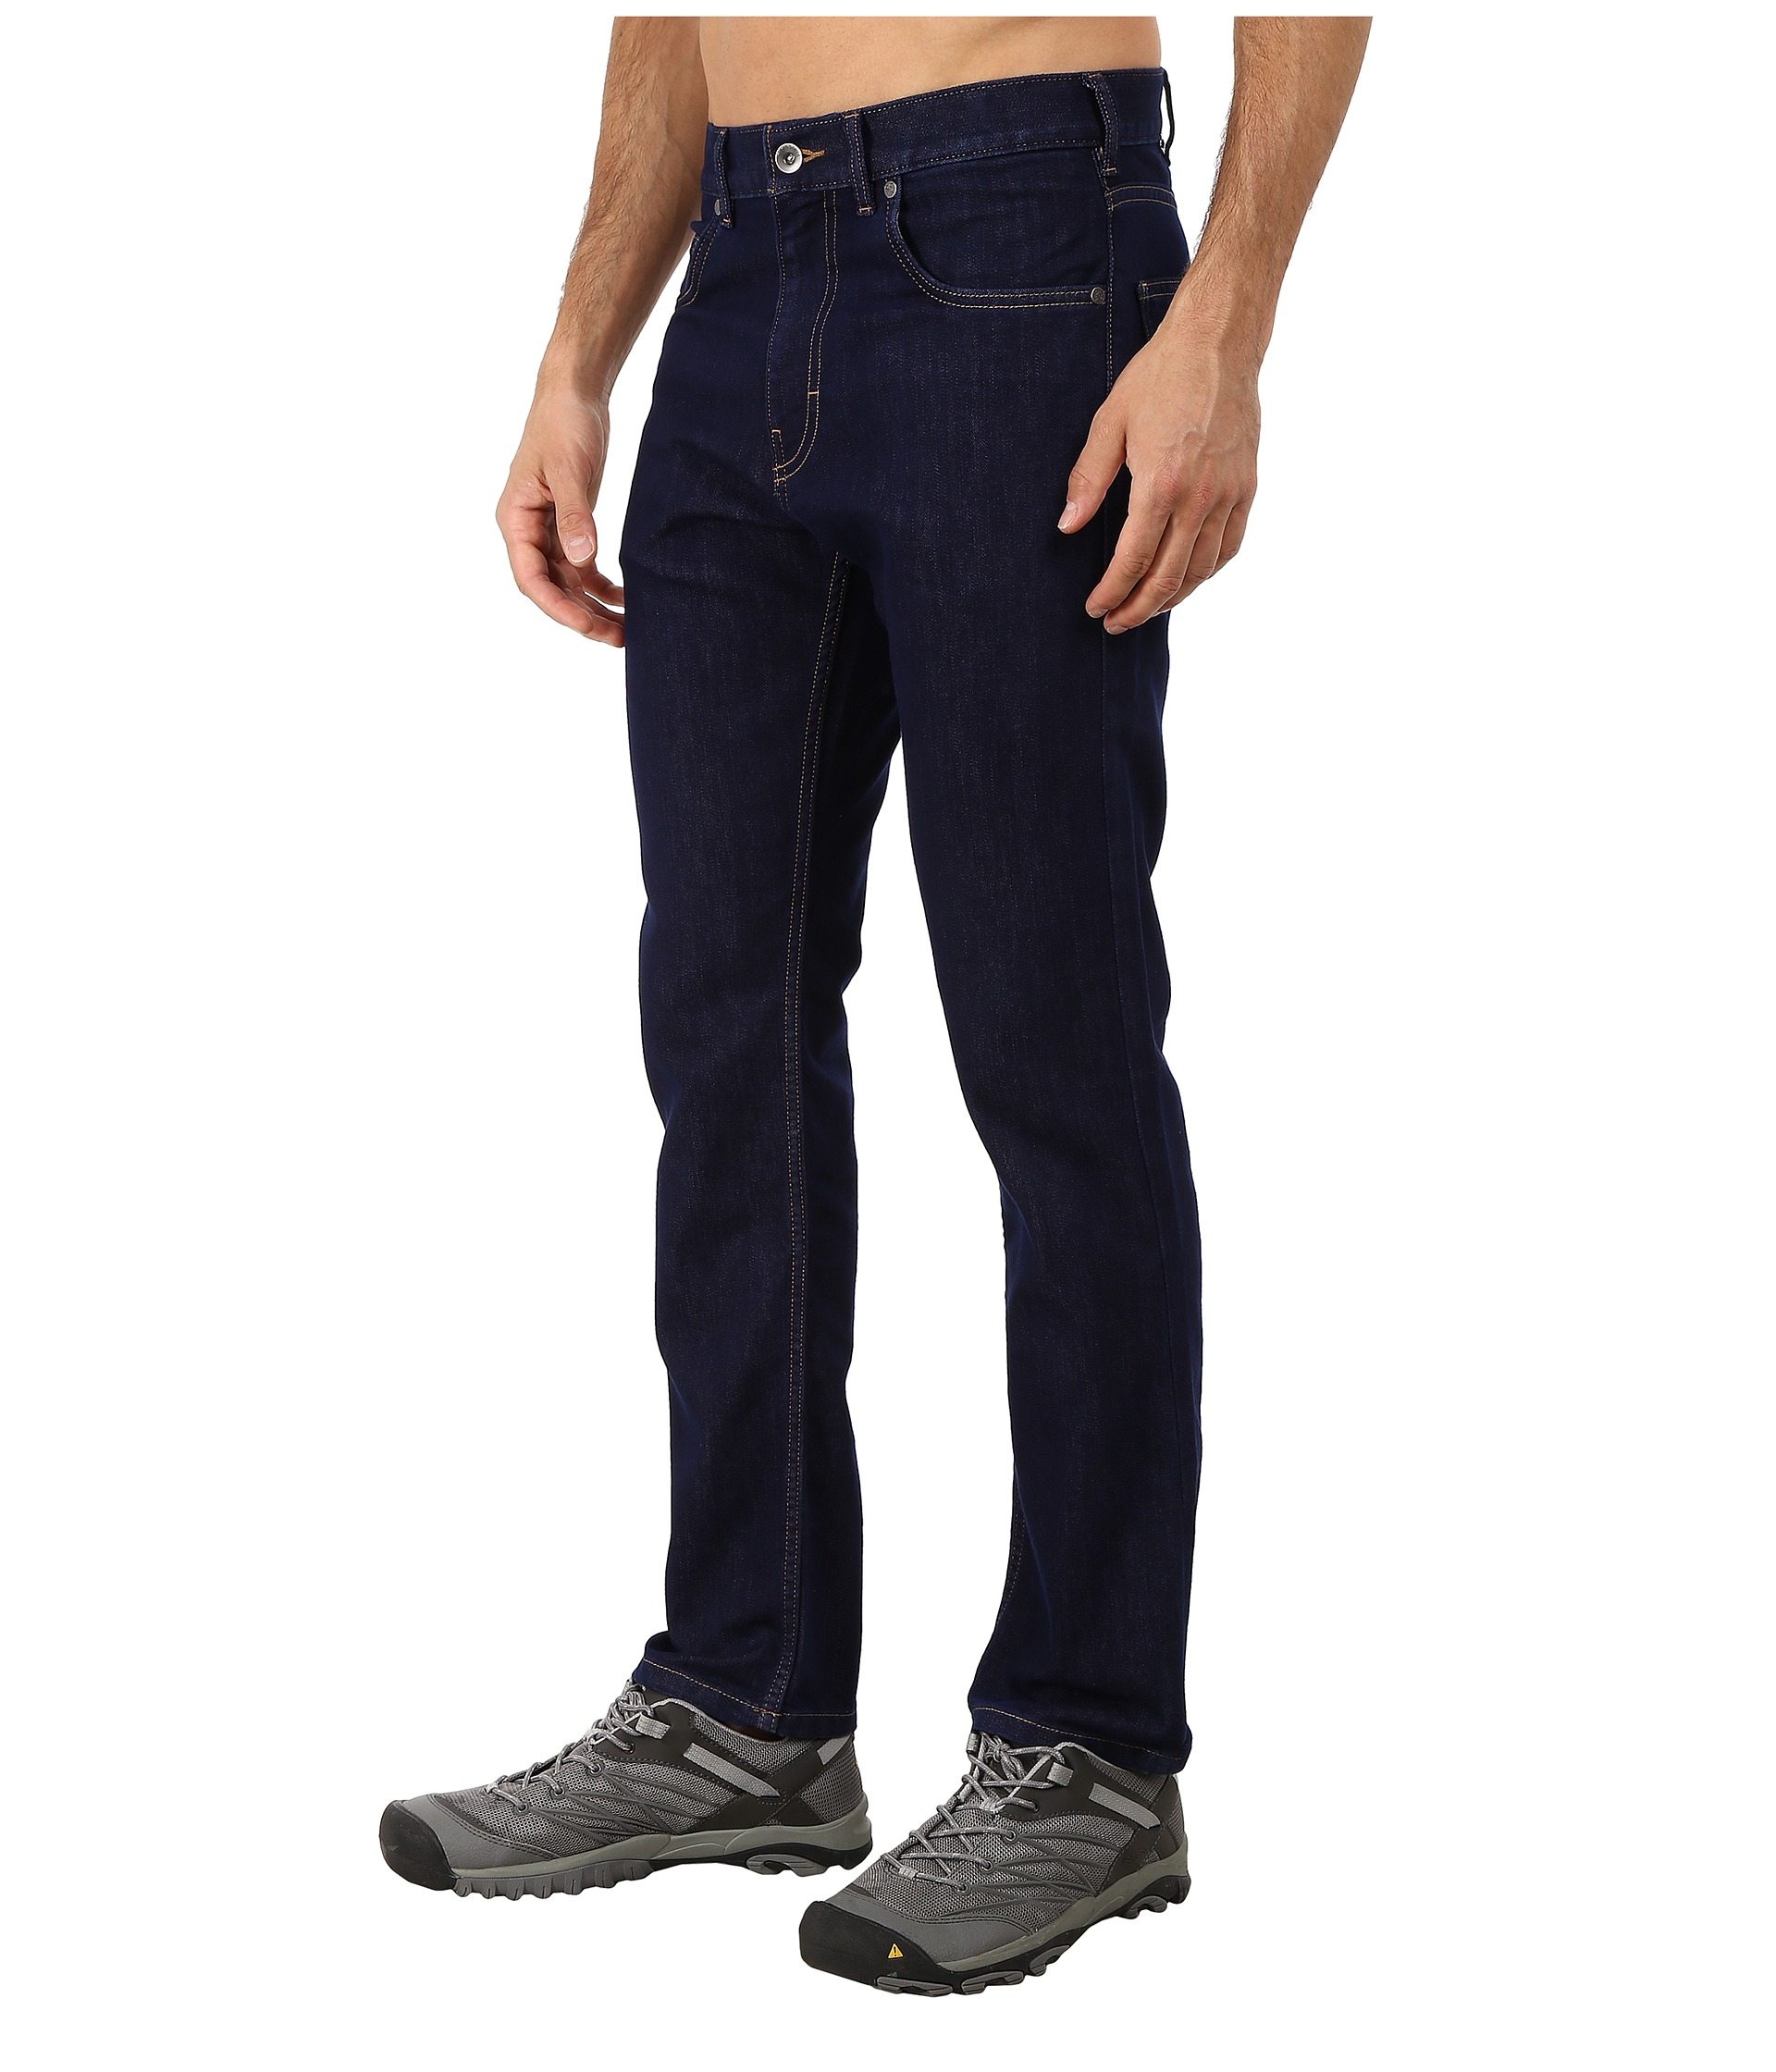 patagonia men's performance straight fit jeans